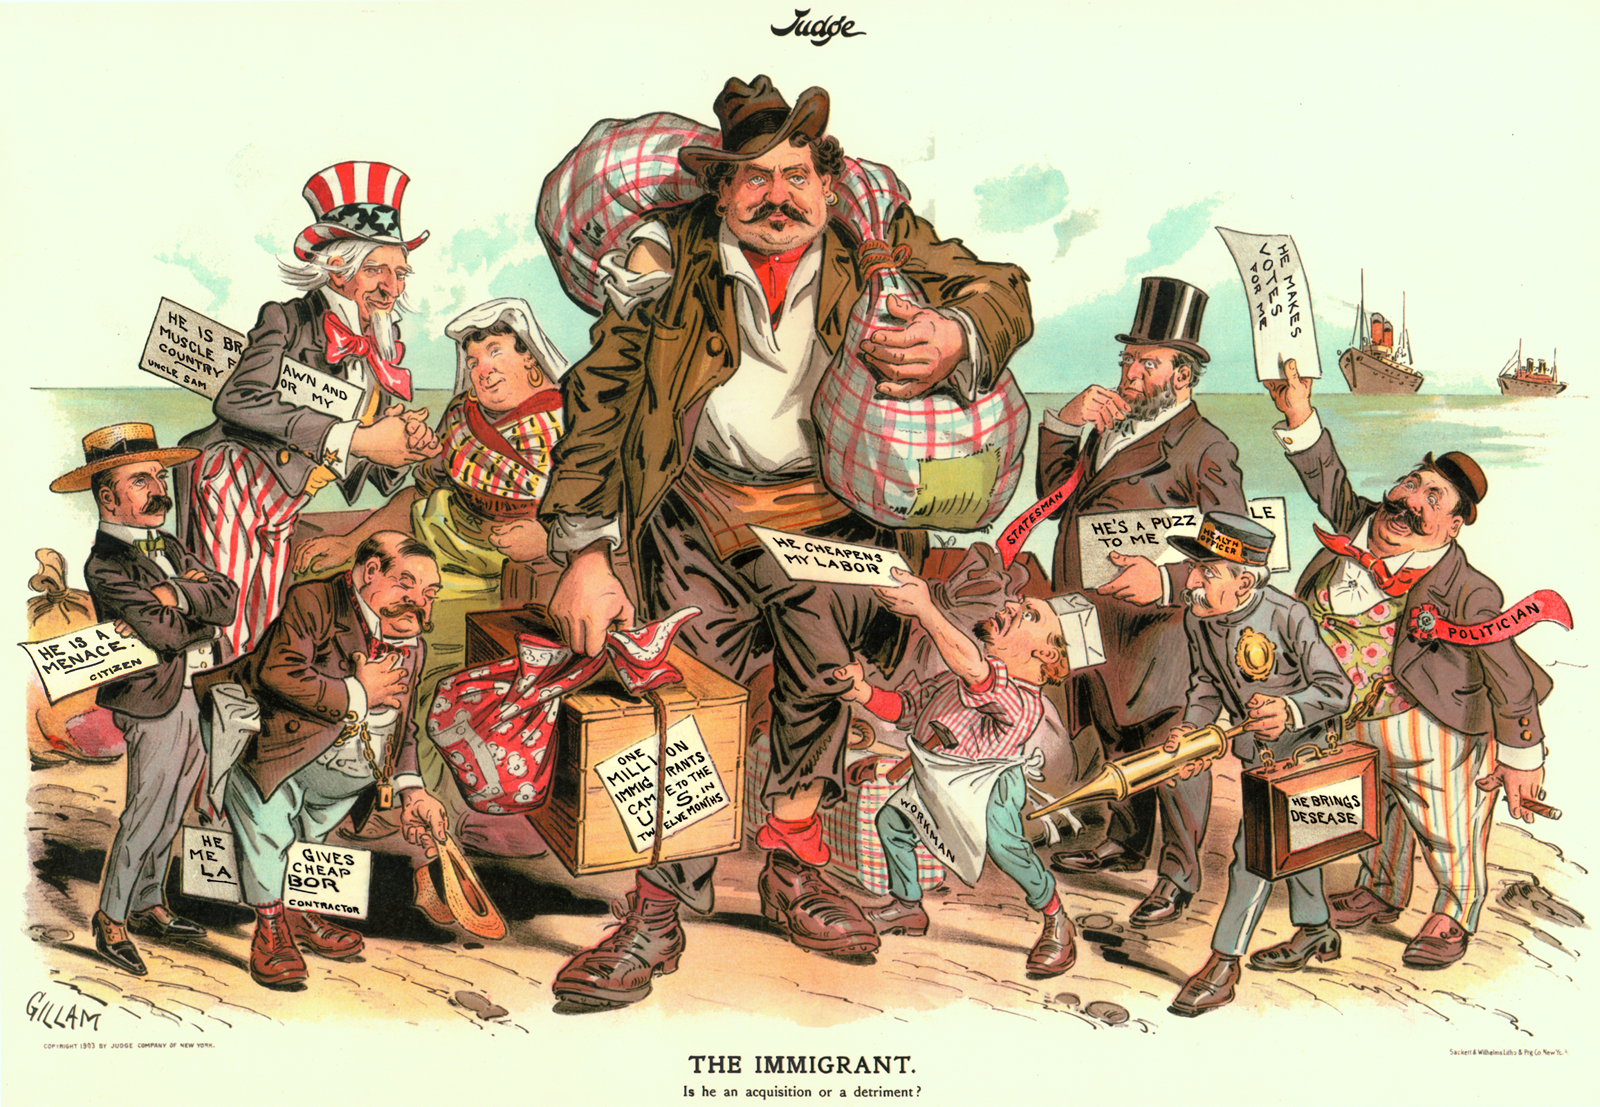 Color political cartoon featuring a central figure of a plump man with a flushed face and a large moustache, carrying various bundles and boxes. Around him are a variety of people holding signs indicating their attitudes toward him. The caption below reads "THE IMMIGRANT / Is he an acquisition or a detriment?"